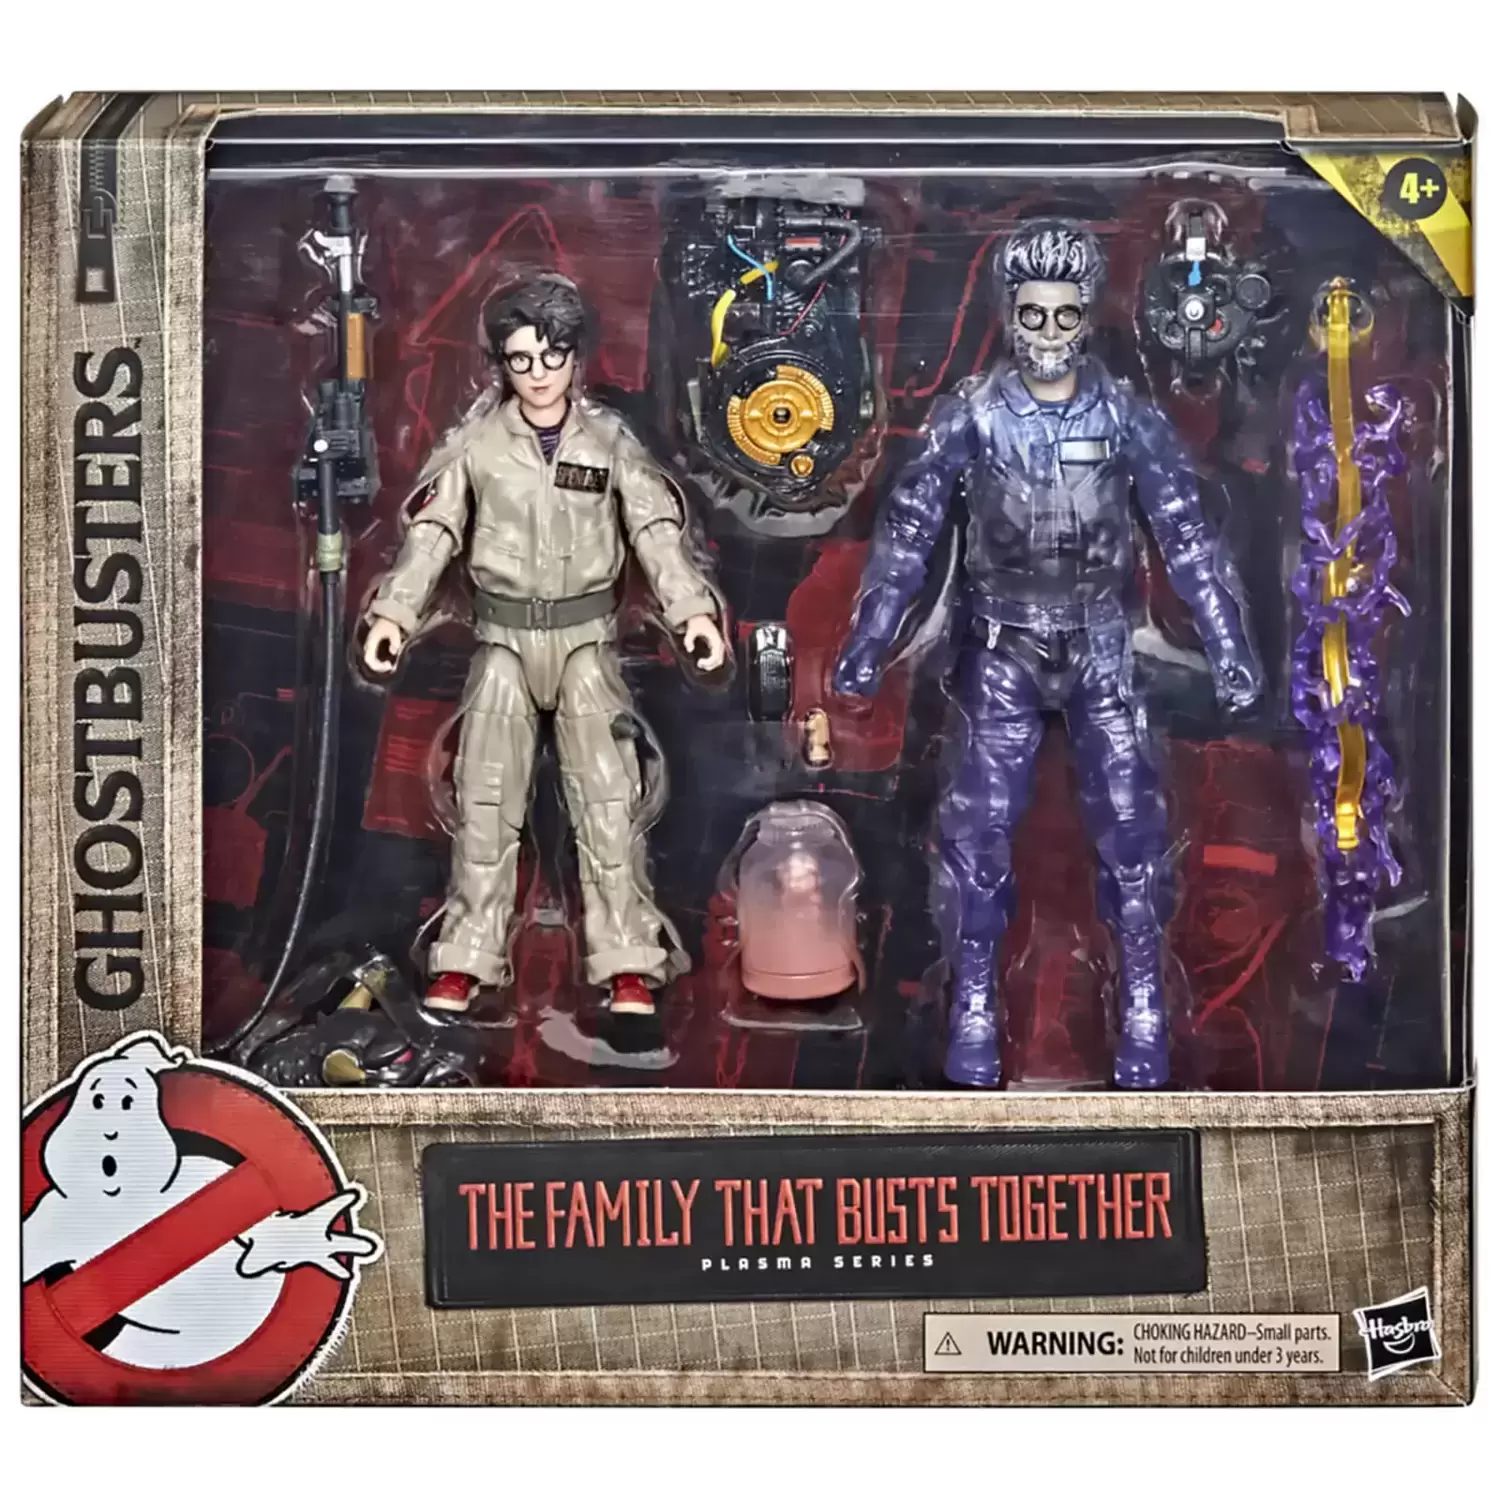 Ghostbusters Plasma Series - The Family That Busts Together - Pheobe &  Egon Spengler 2-Pack